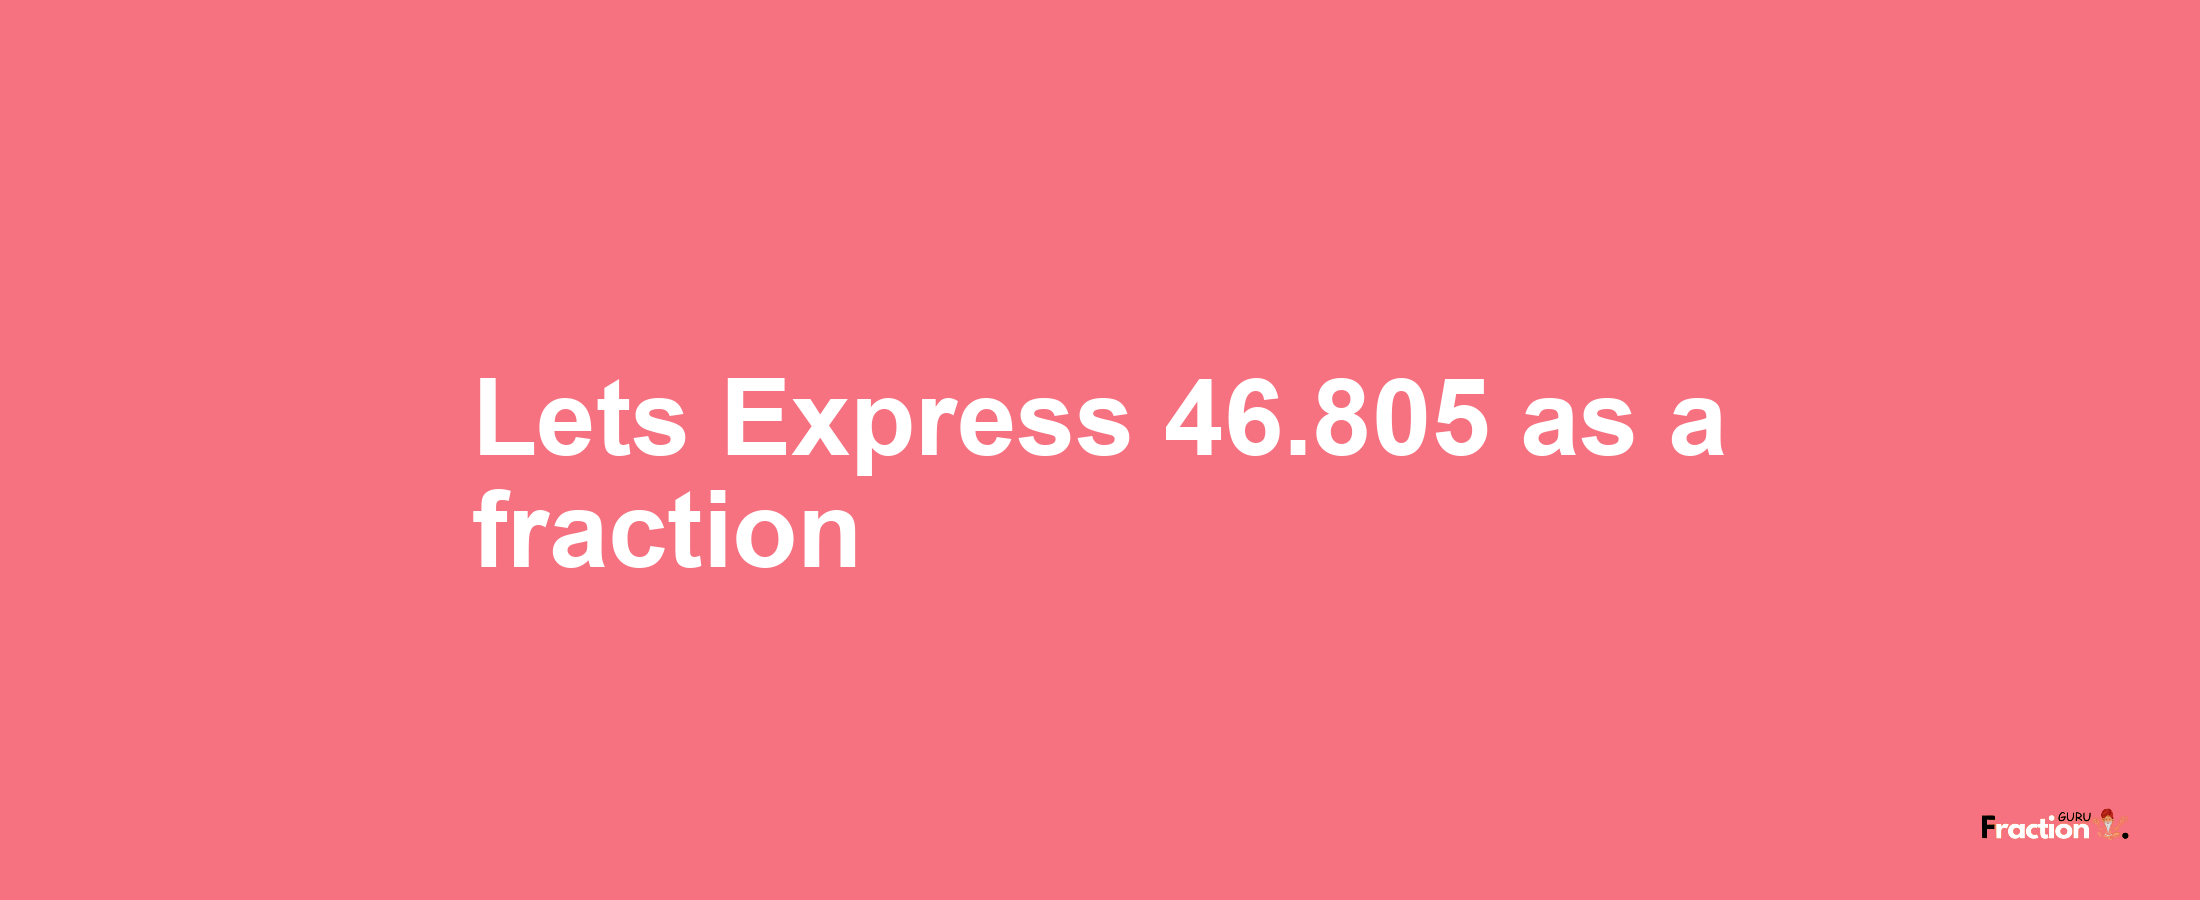 Lets Express 46.805 as afraction